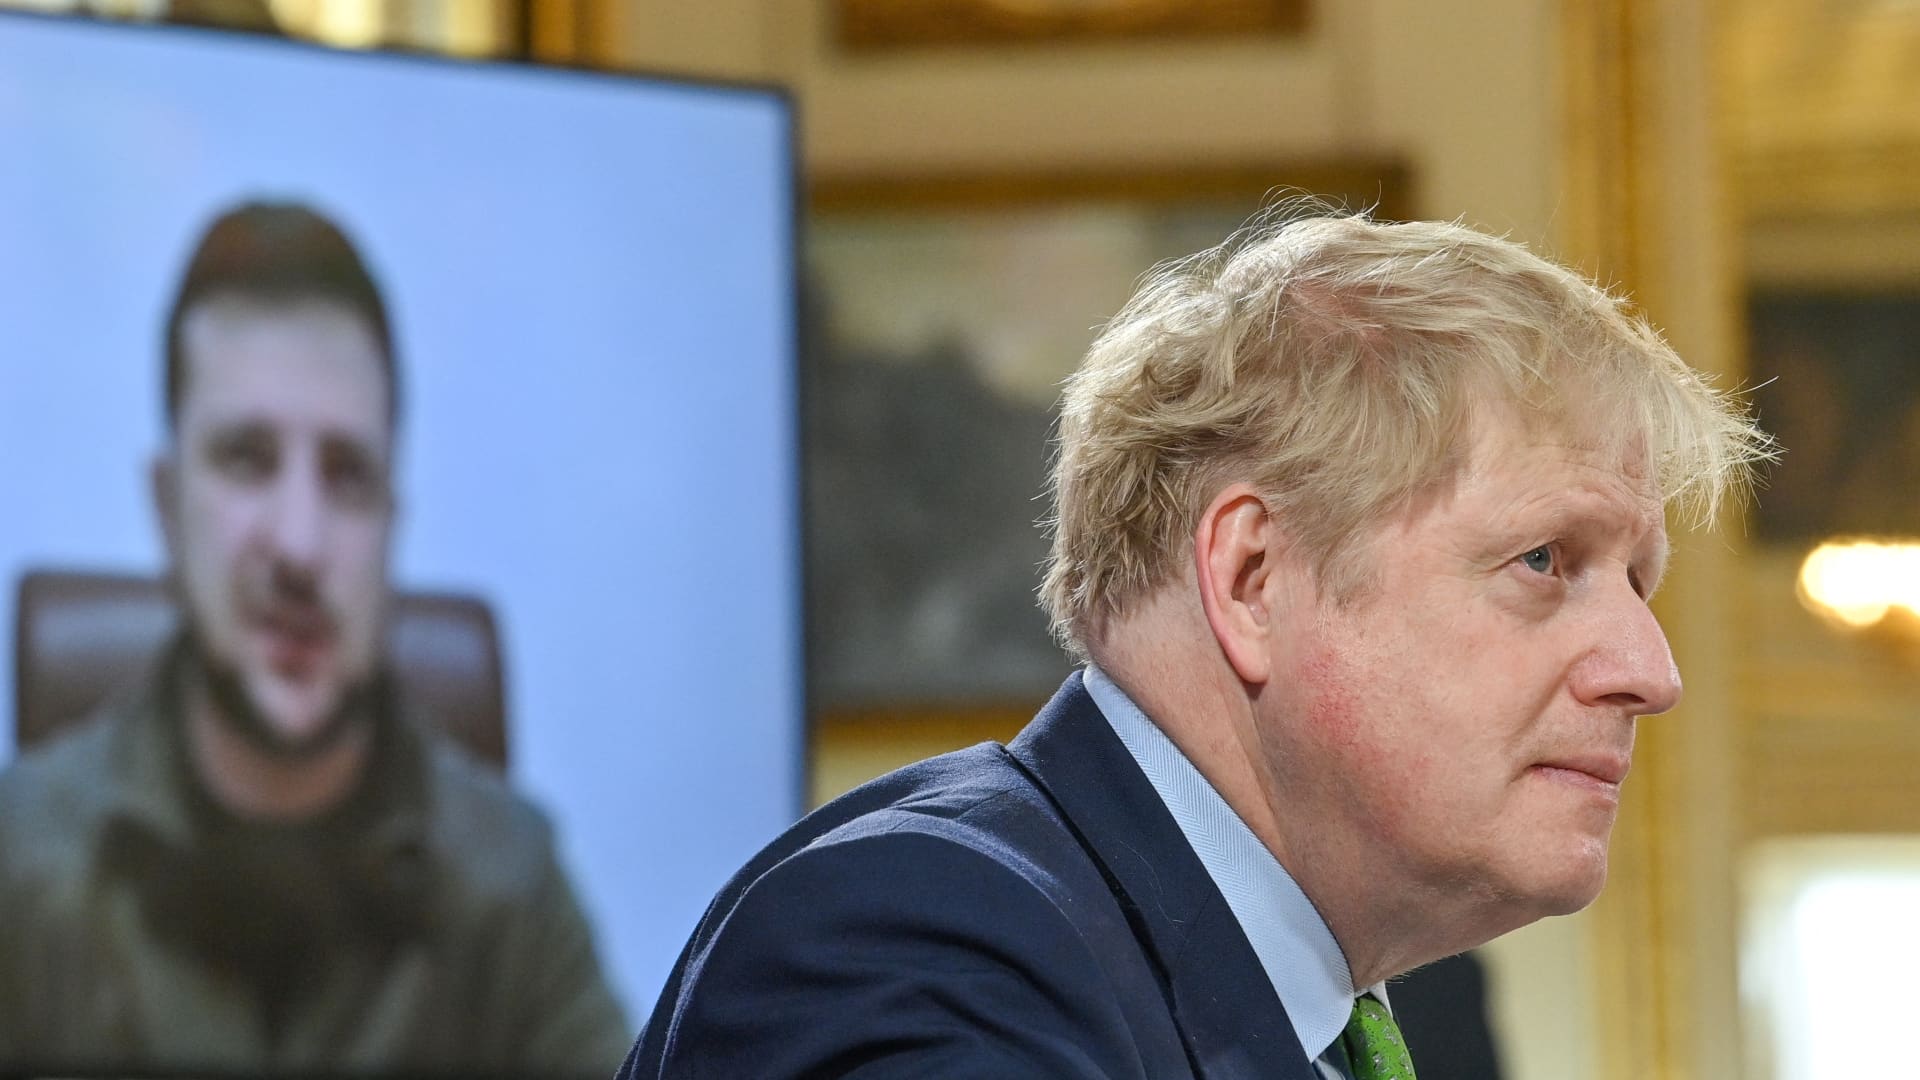 Russia welcomed Boris Johnson's departure from office.